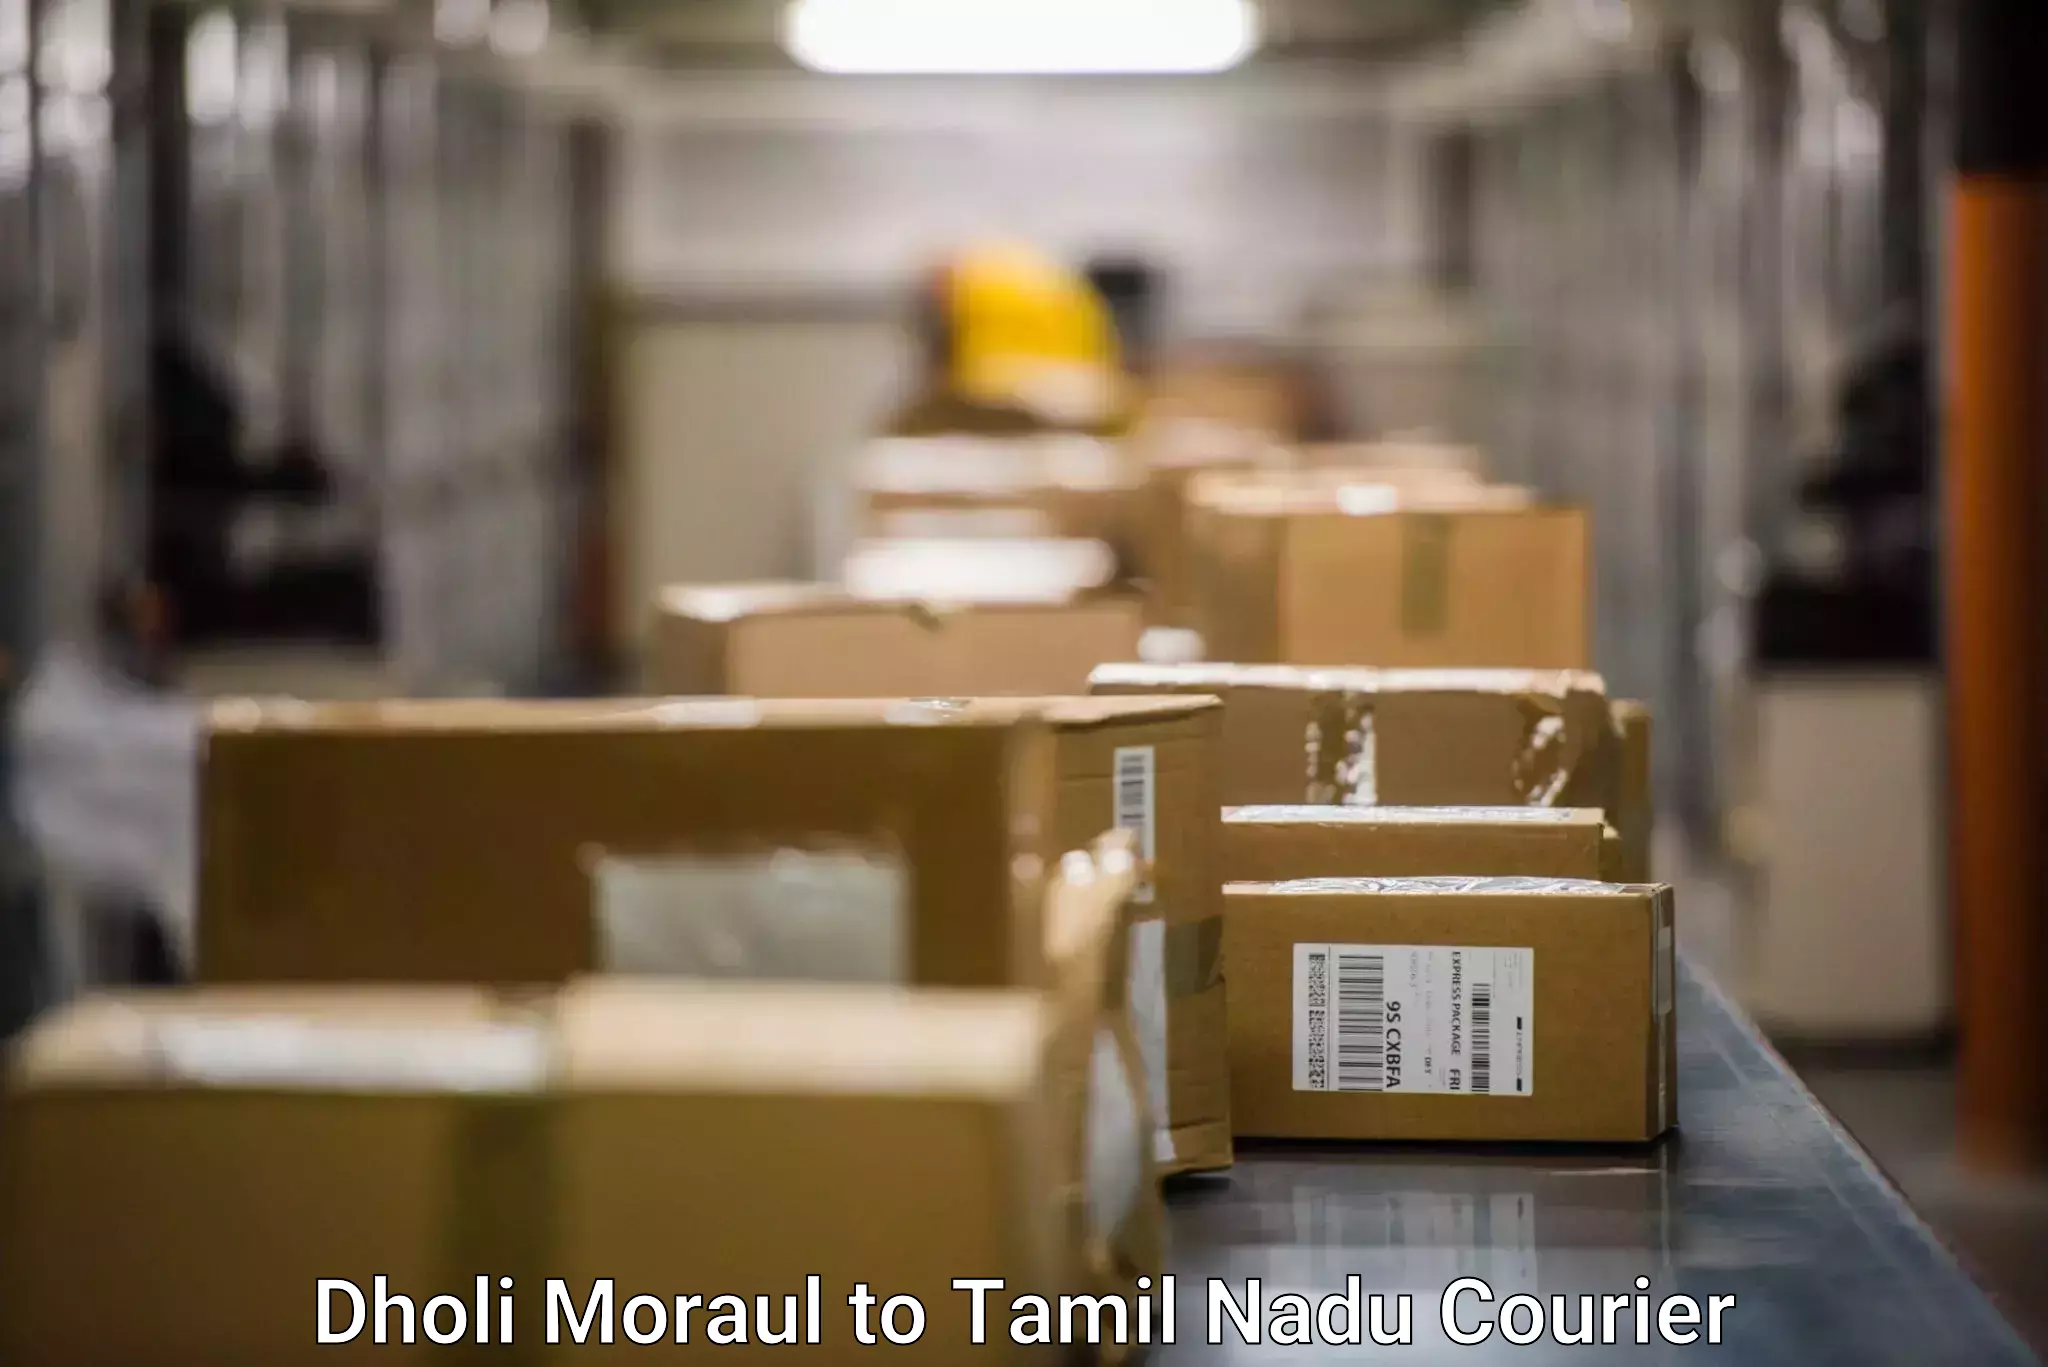 Courier dispatch services Dholi Moraul to Chennai Port